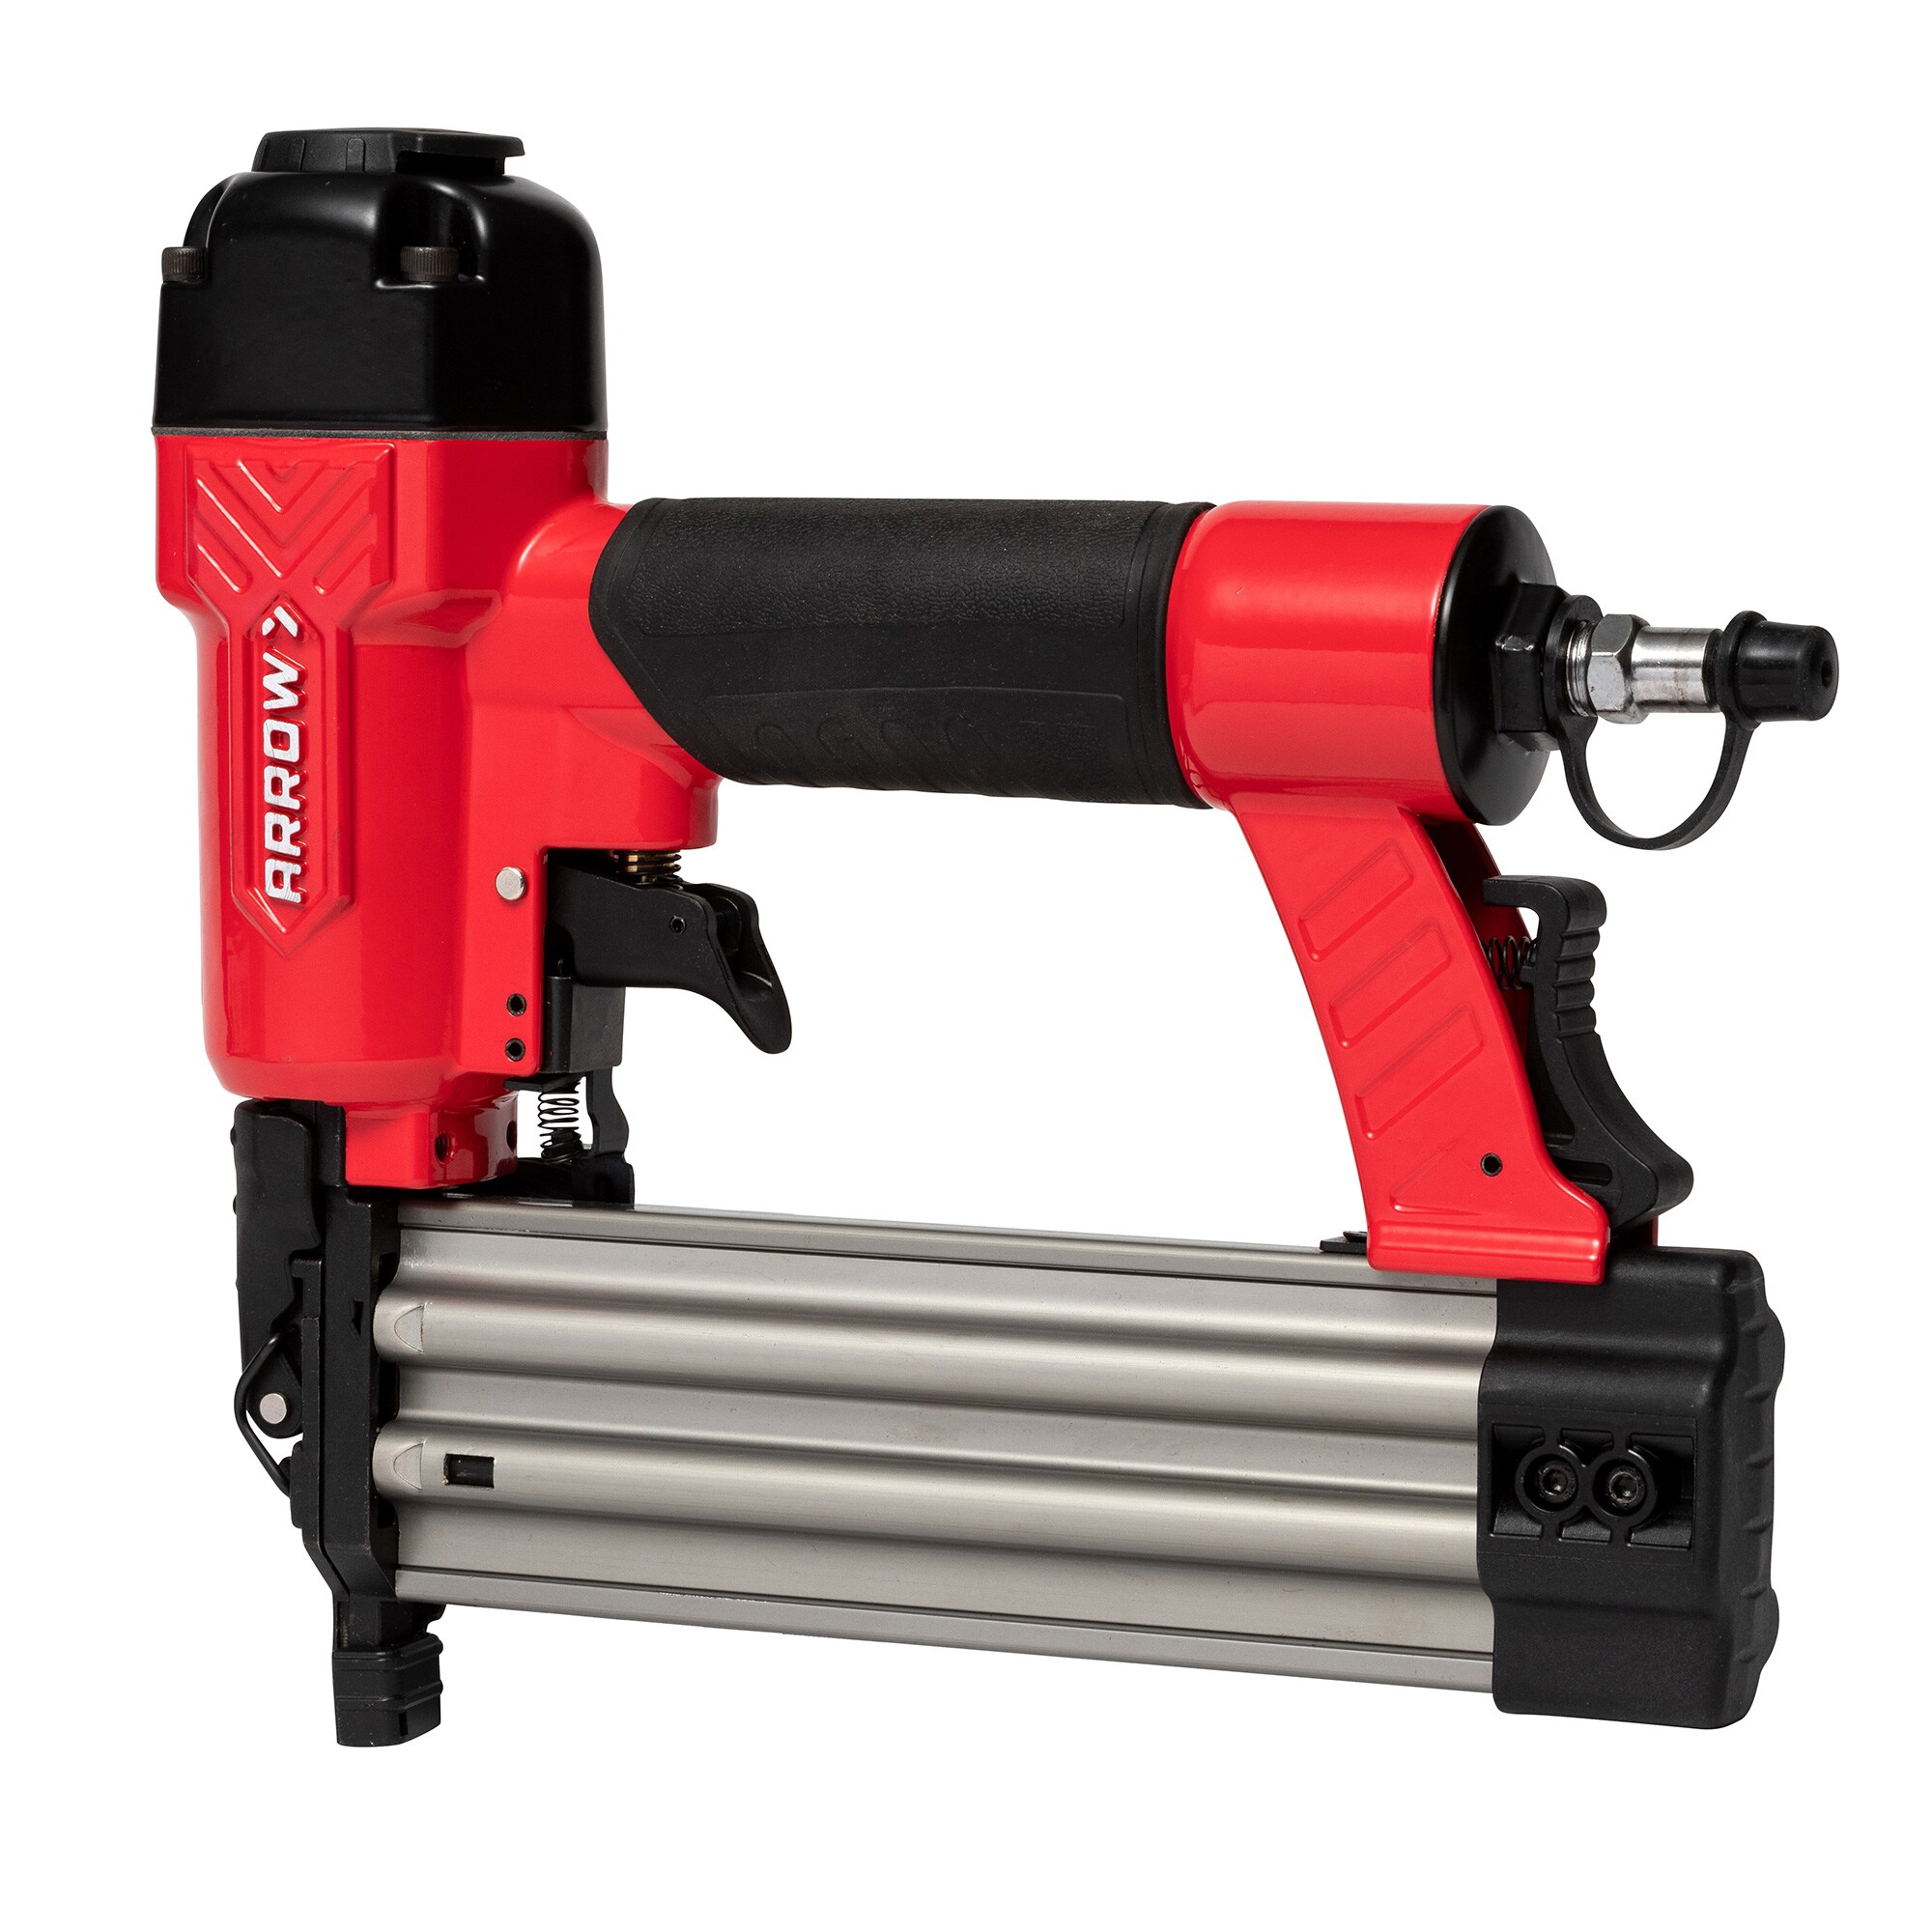 Arrow PT50 Oil-Free Pneumatic Staple Gun, Fits 1/4-in, 5/16-in, 3/8-in,  1/2-in, 9/16-in Staples, Red | Canadian Tire